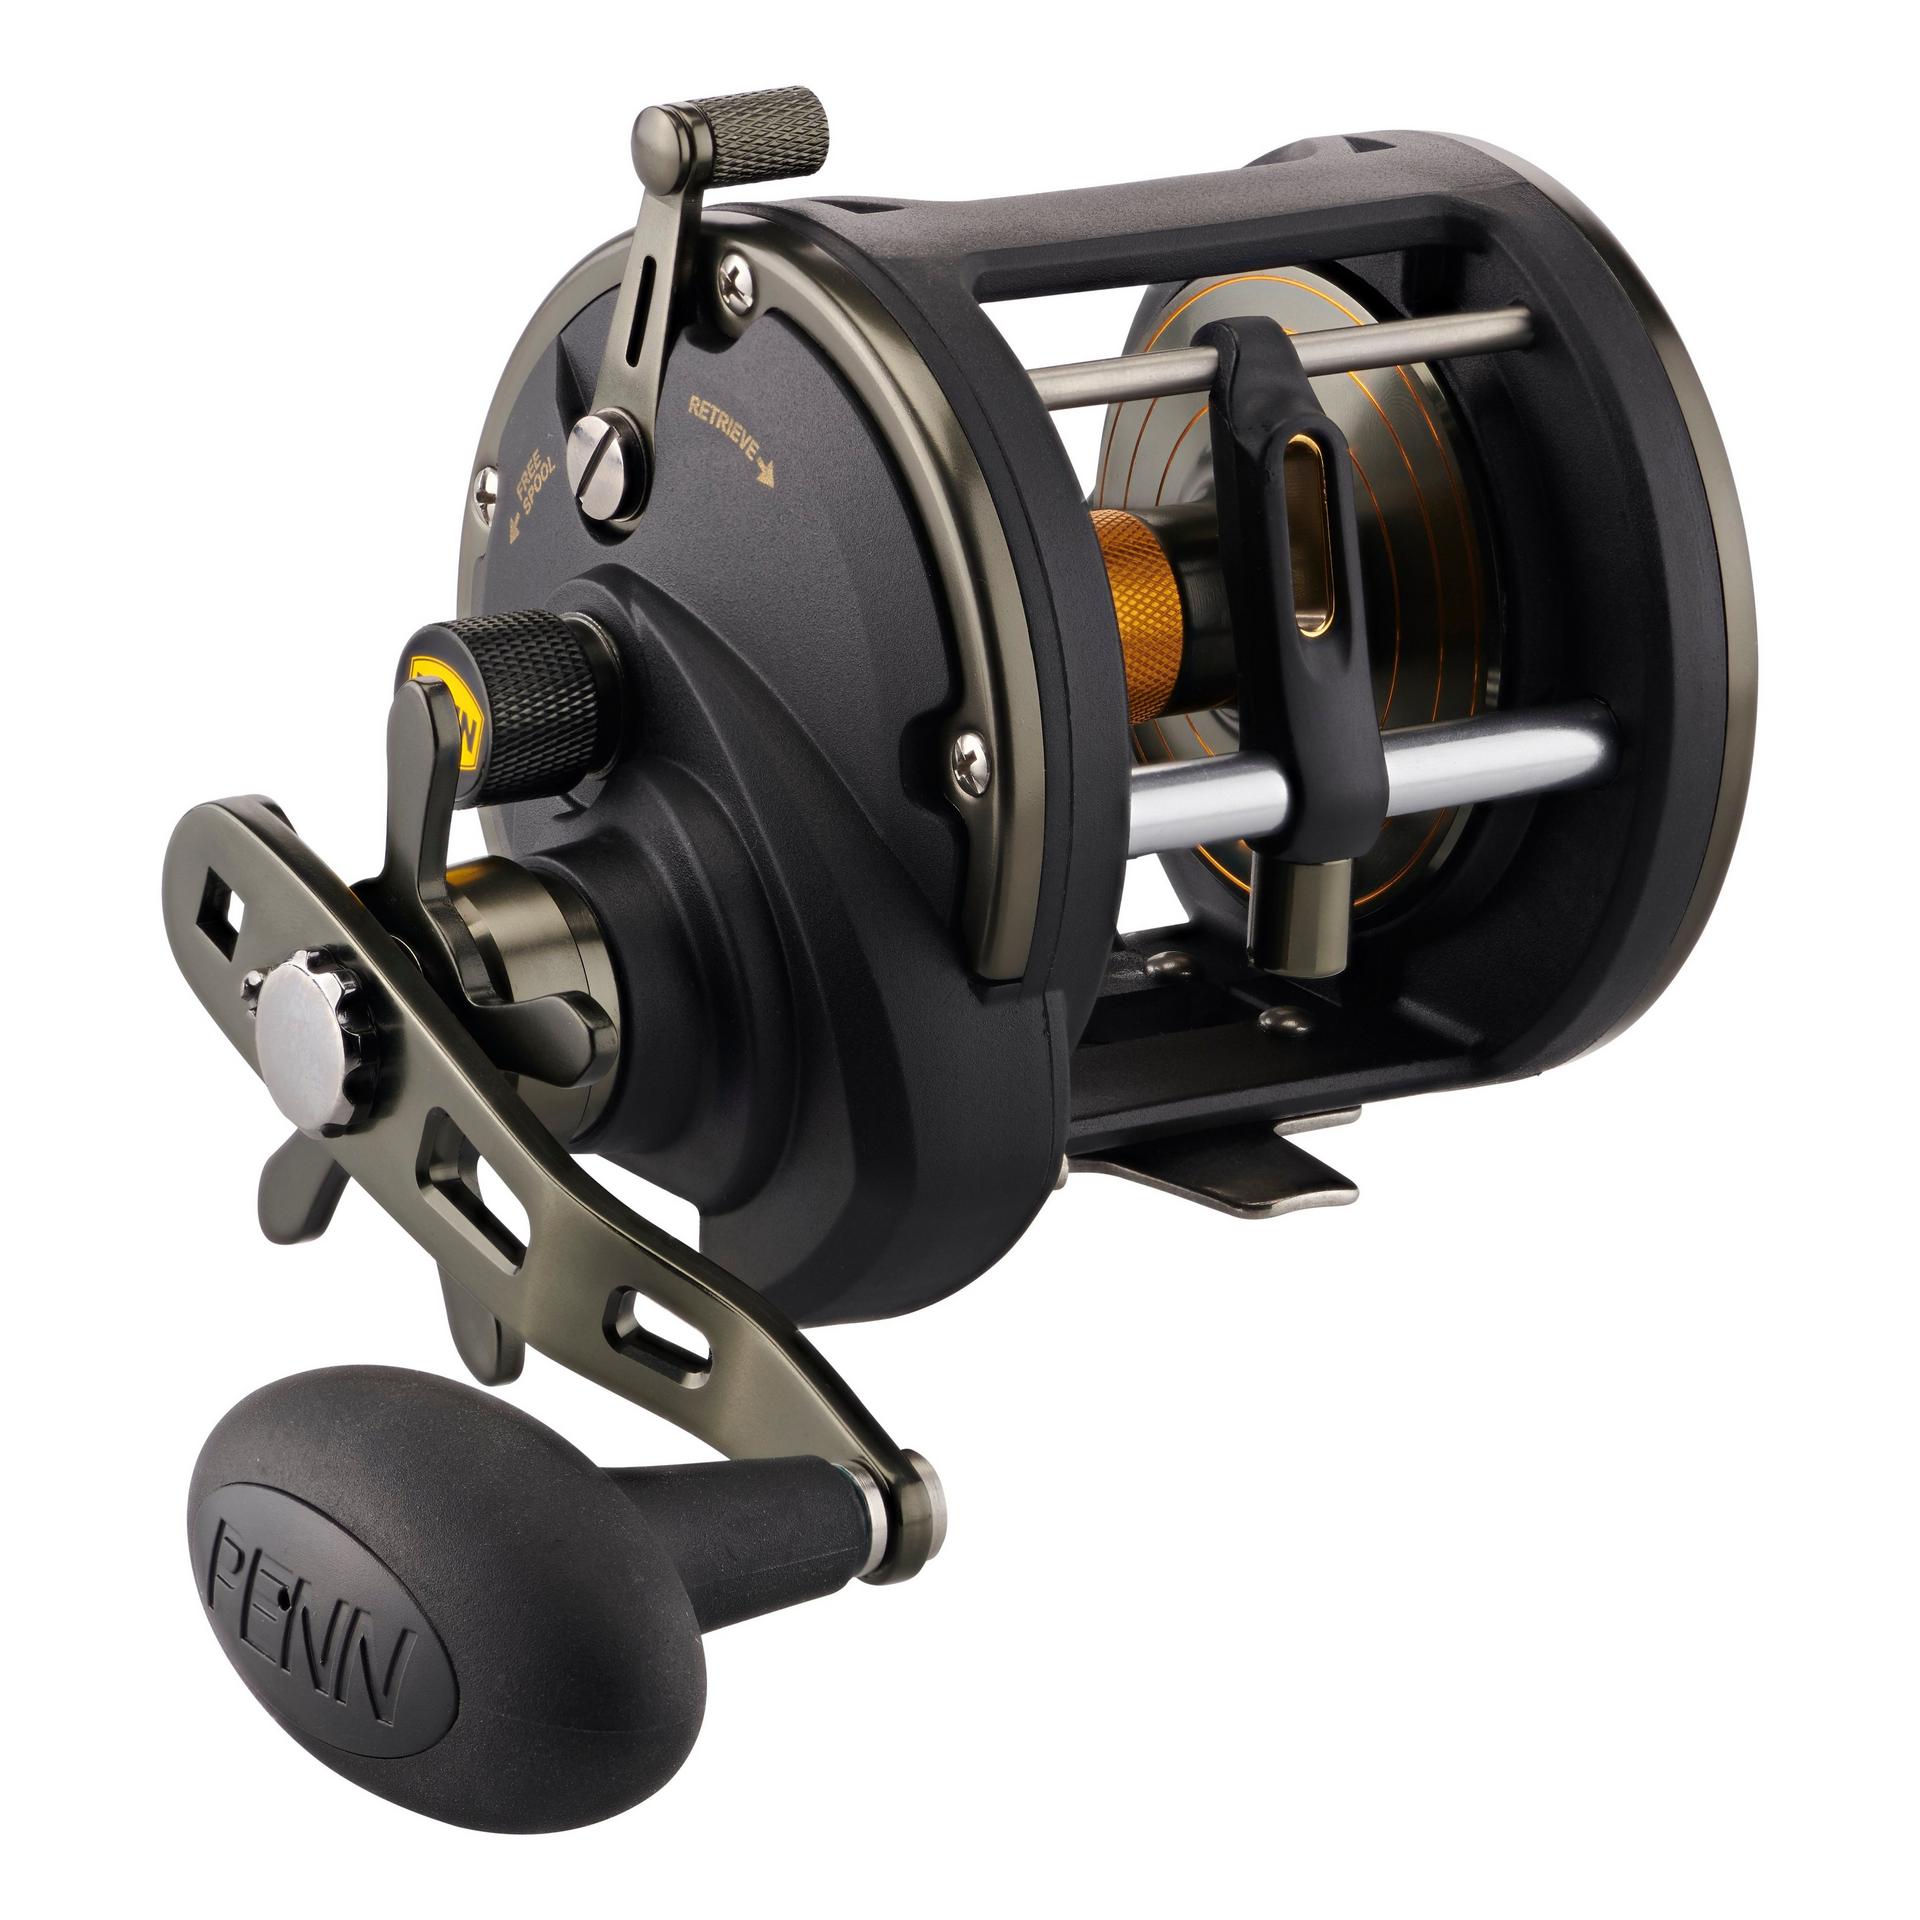 PENN Levelwind Reel with Line Counter